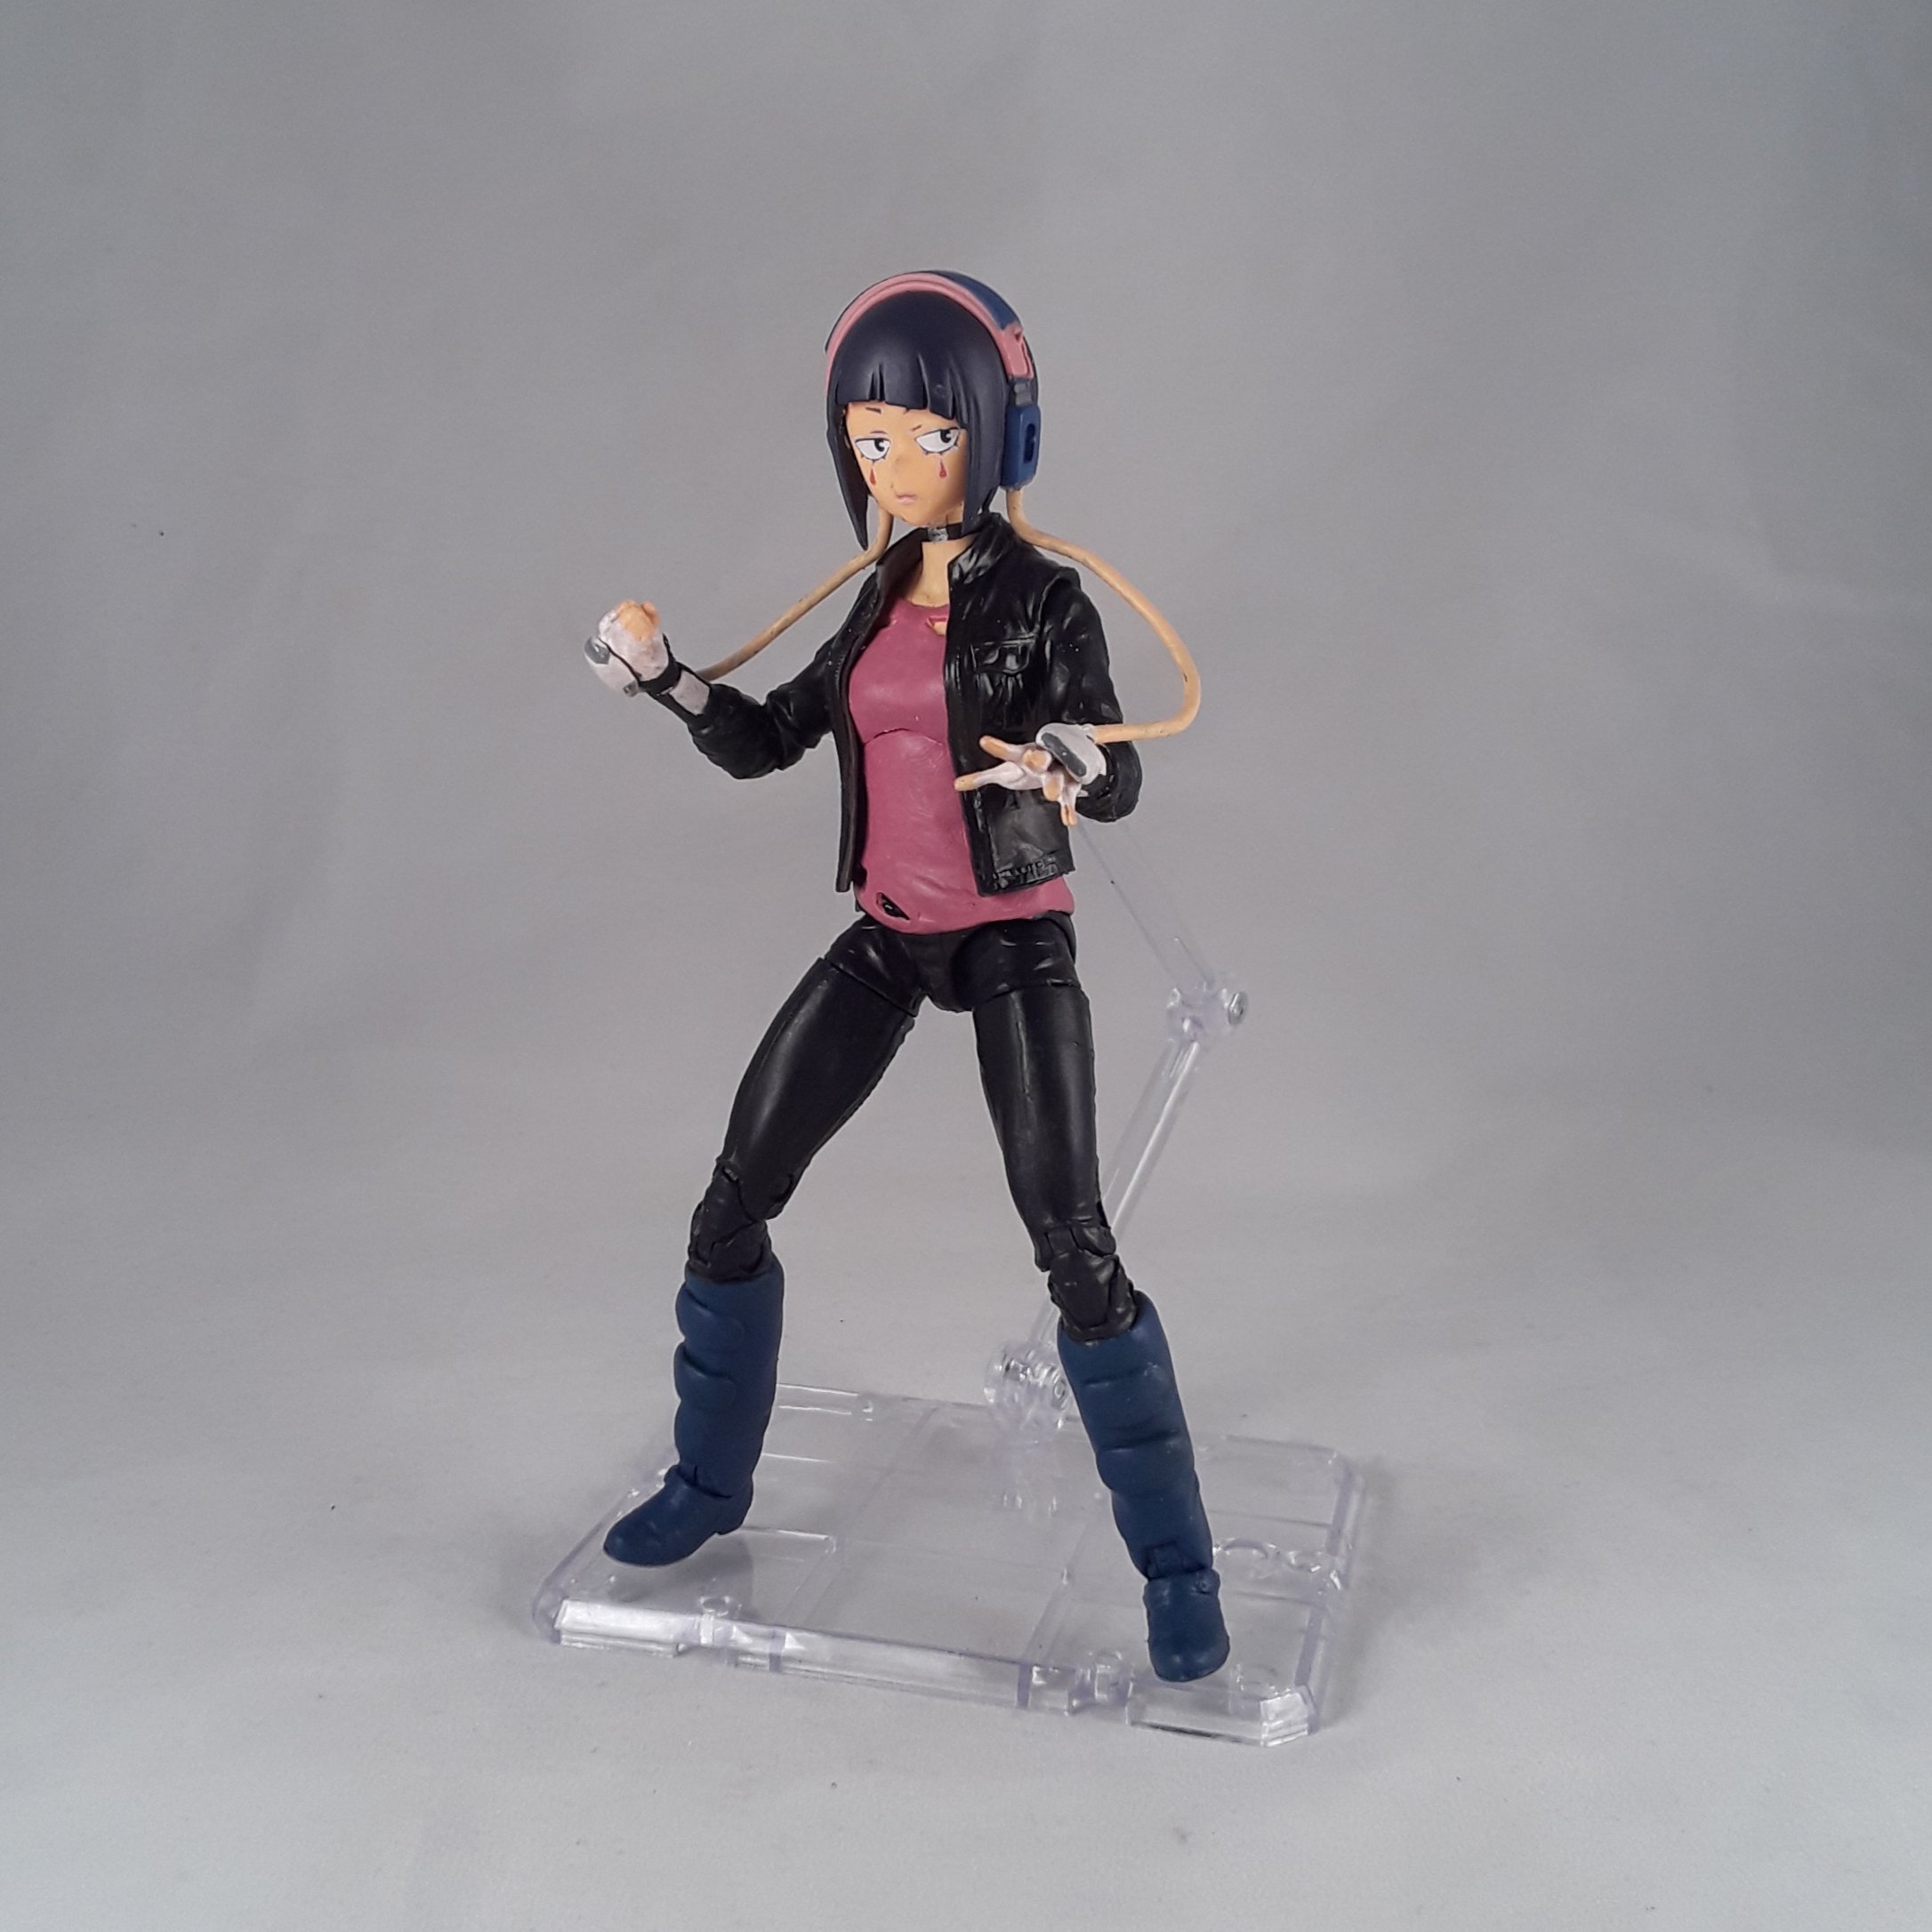 Gå op Inspektør koste Viet Huynh on Twitter: "I made a custom Kyoka Jiro action figure. All these  will be available for sale at @captainscomicexpo Feb. 22-23 #myheroacademia  #bokunoheroacademia https://t.co/2Nc5rmD0v8" / Twitter